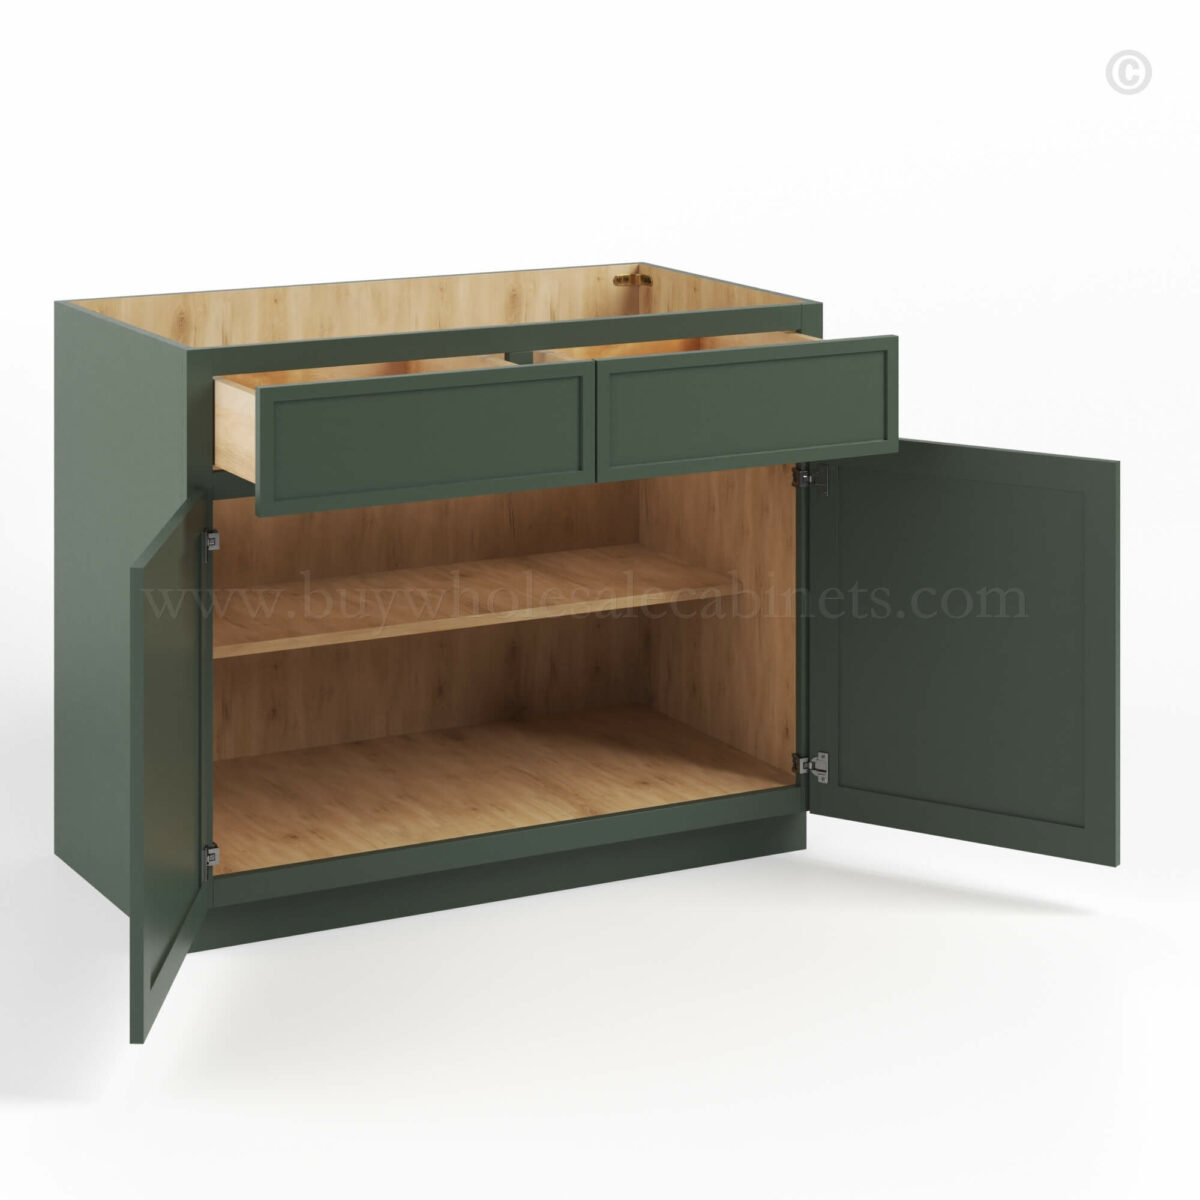 Slim Shaker Green Base Cabinet Double Doors & Double Drawer, rta cabinets, wholesale cabinets